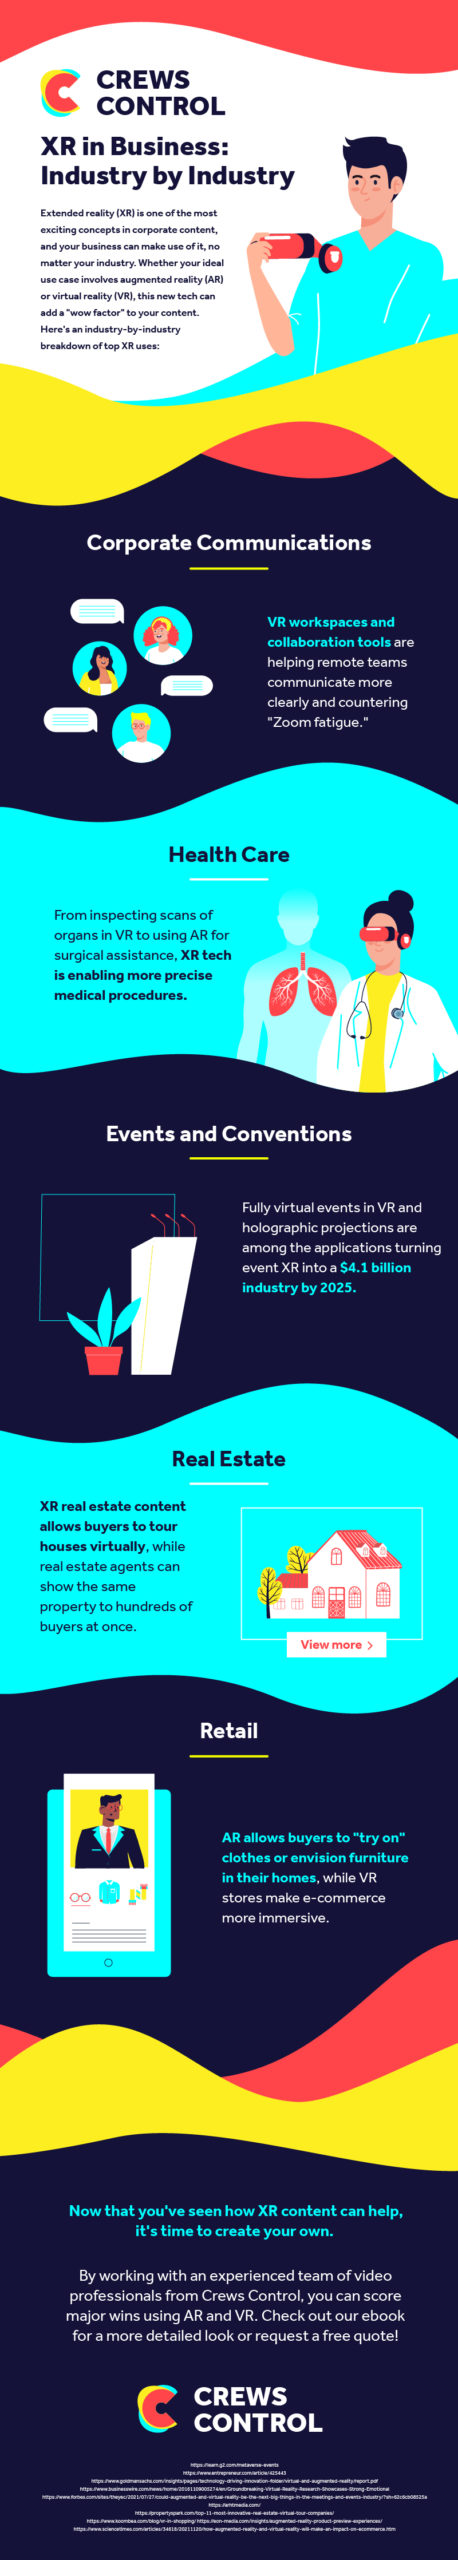 july infographic scaled XR